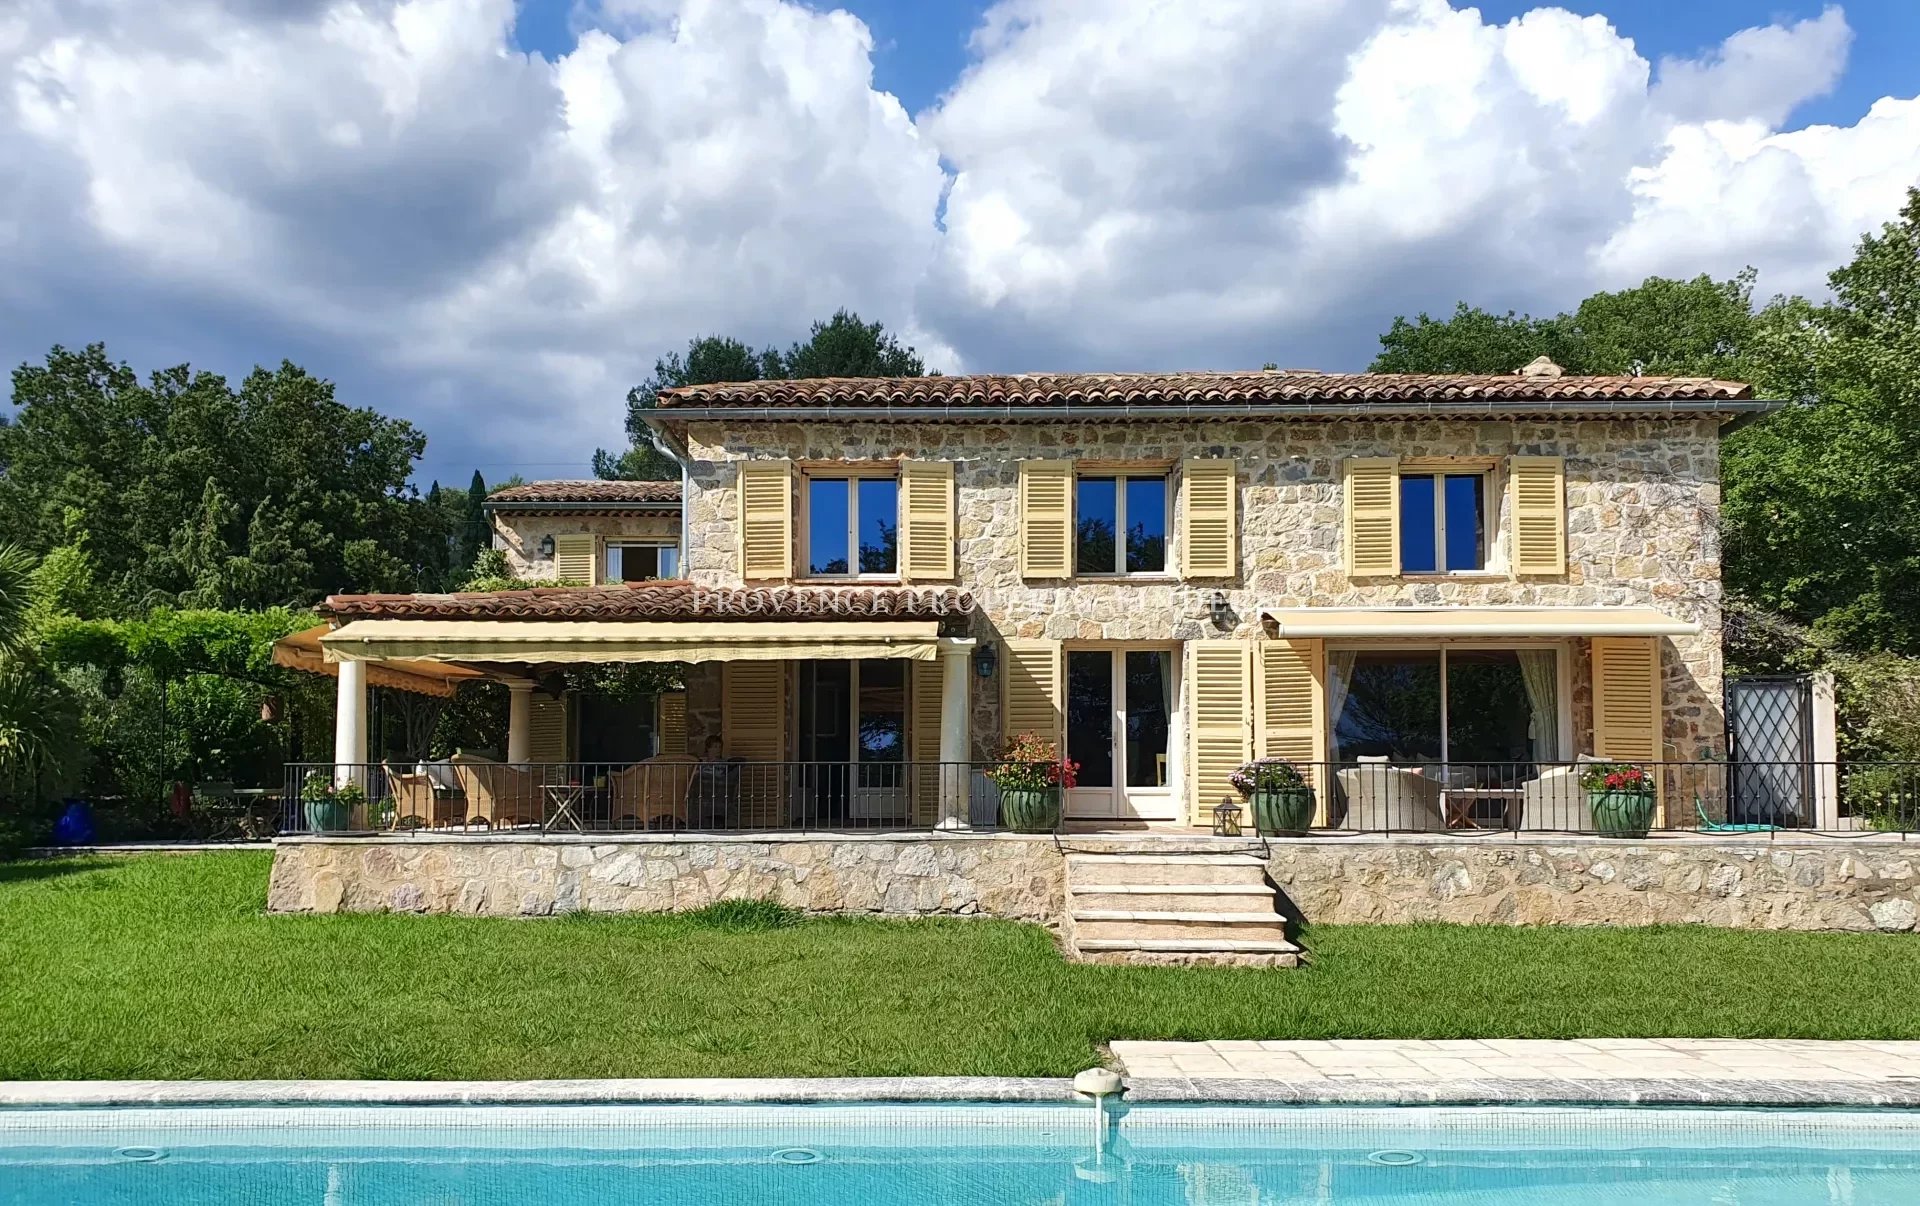 Exclusivity. Most Charming Property in the Provence.